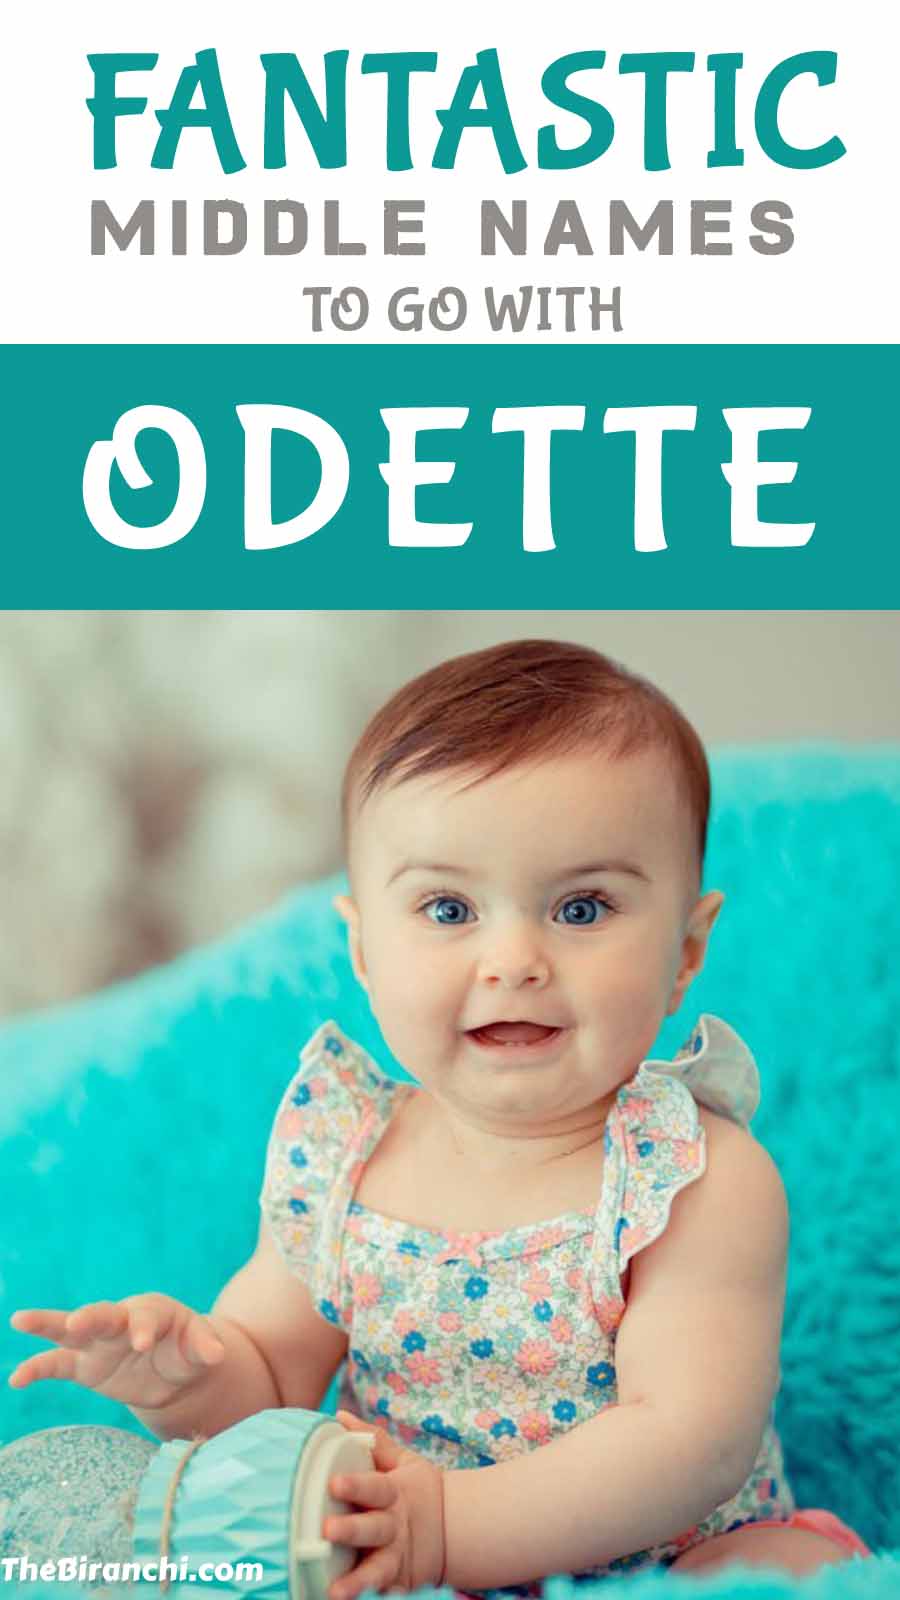 fantastic-middle-names-to-go-with-odette